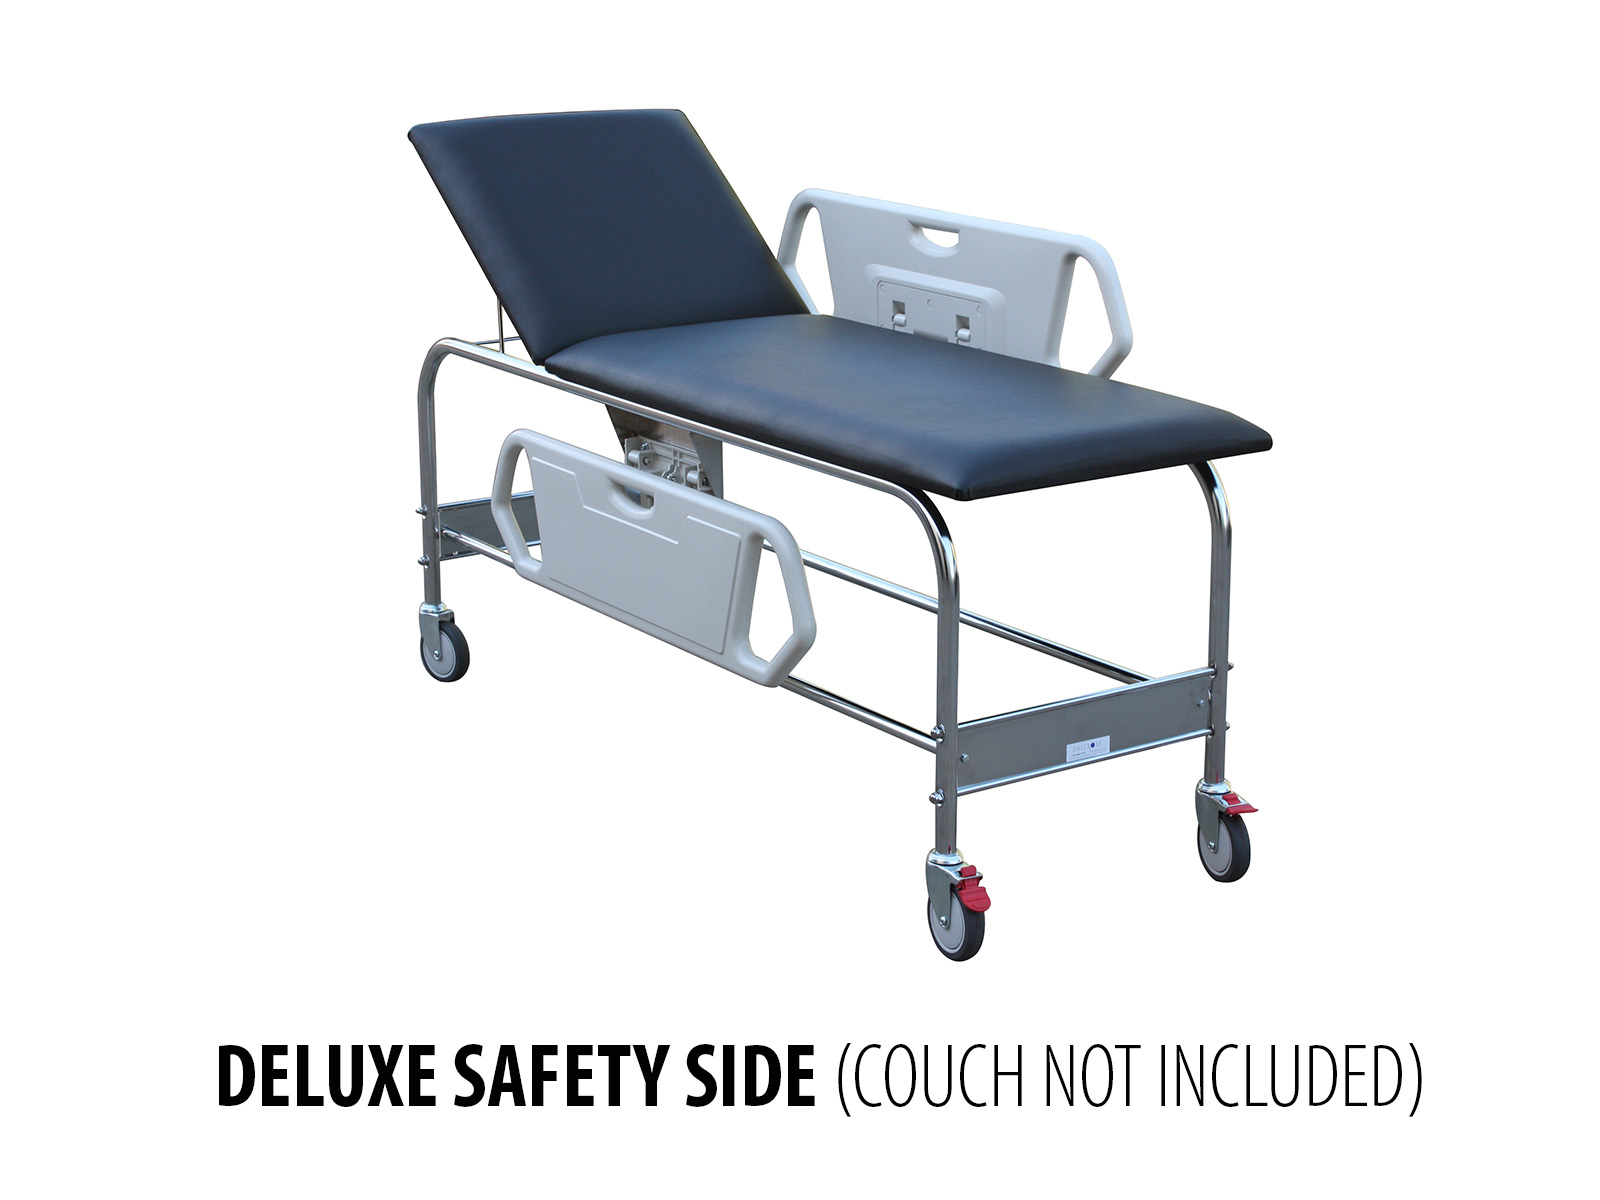 DELUXE-SAFETY-SIDES.jpg